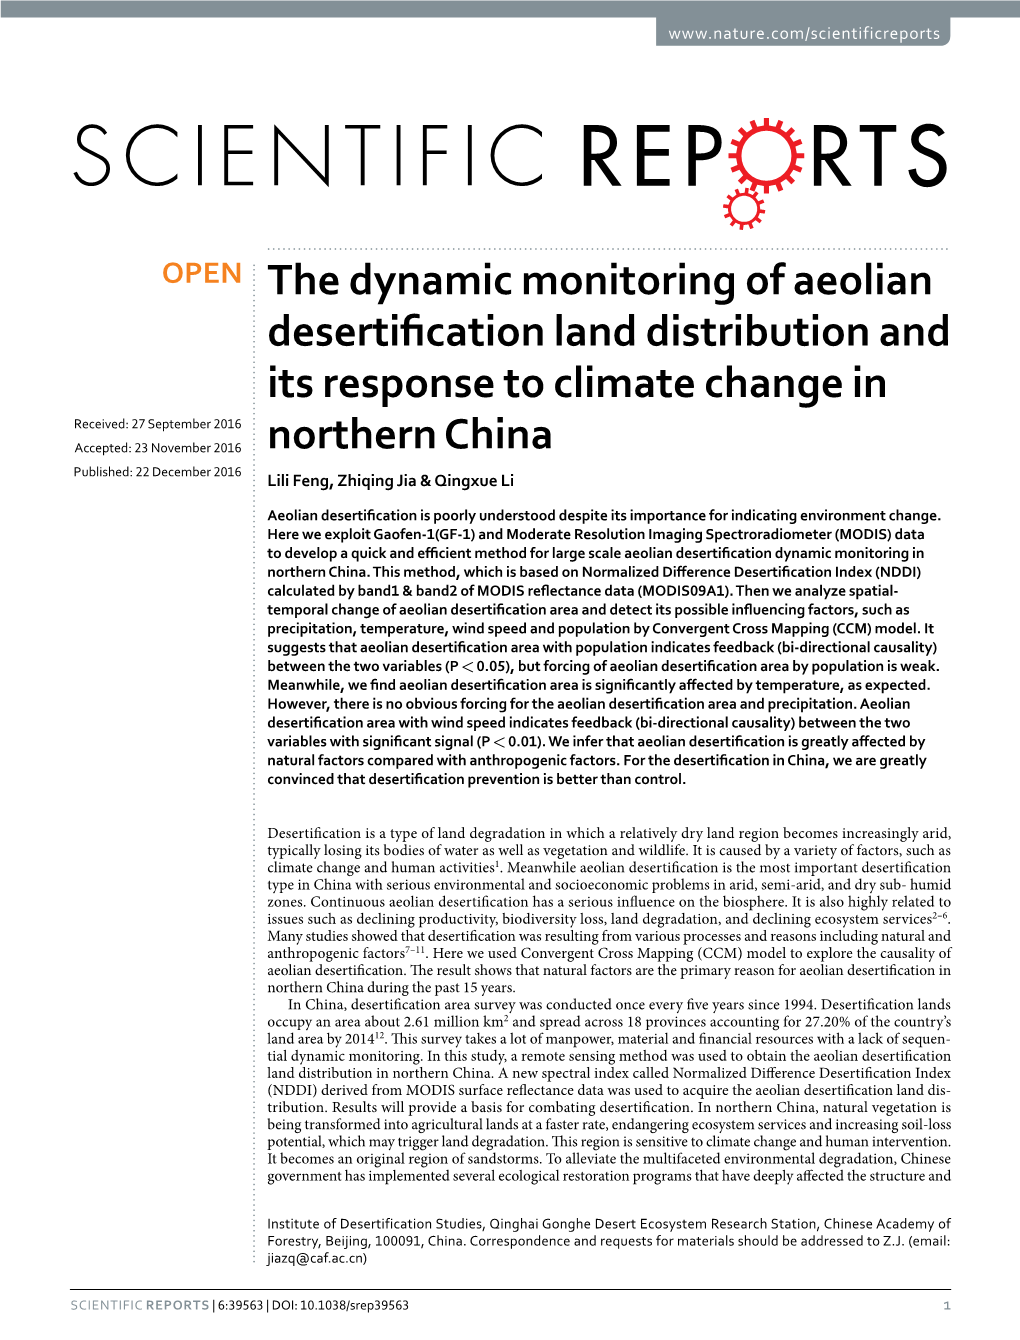 The Dynamic Monitoring of Aeolian Desertification Land Distribution And